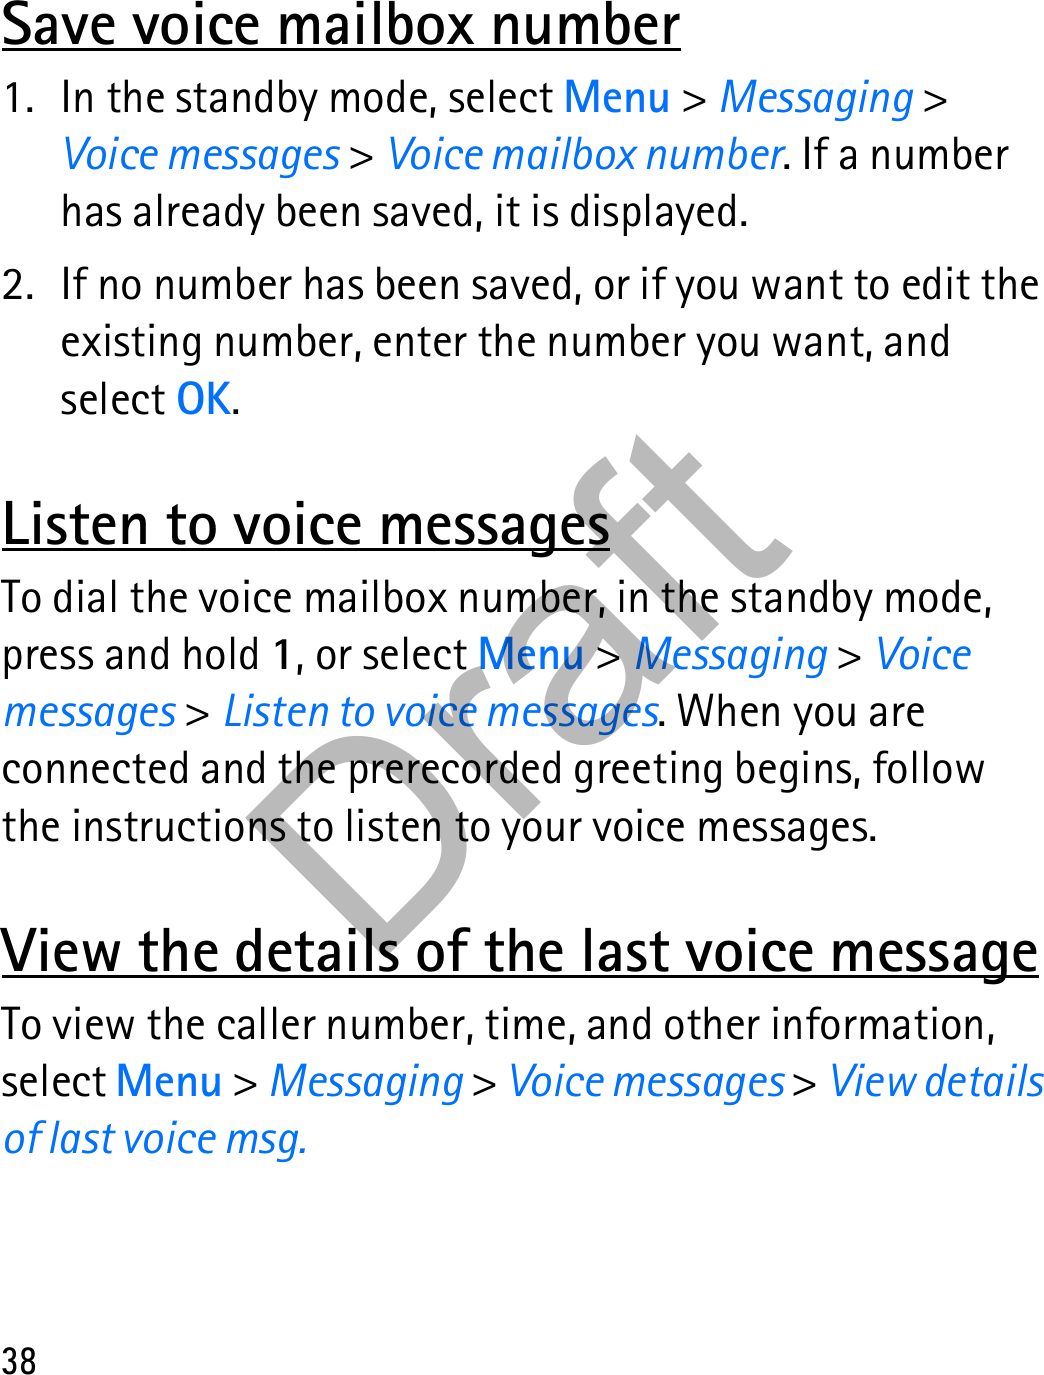 38Save voice mailbox number1. In the standby mode, select Menu &gt; Messaging &gt; Voice messages &gt; Voice mailbox number. If a number has already been saved, it is displayed.2. If no number has been saved, or if you want to edit the existing number, enter the number you want, and select OK.Listen to voice messagesTo dial the voice mailbox number, in the standby mode, press and hold 1, or select Menu &gt; Messaging &gt; Voice messages &gt; Listen to voice messages. When you are connected and the prerecorded greeting begins, follow the instructions to listen to your voice messages.View the details of the last voice messageTo view the caller number, time, and other information, select Menu &gt; Messaging &gt; Voice messages &gt; View details of last voice msg.Draft